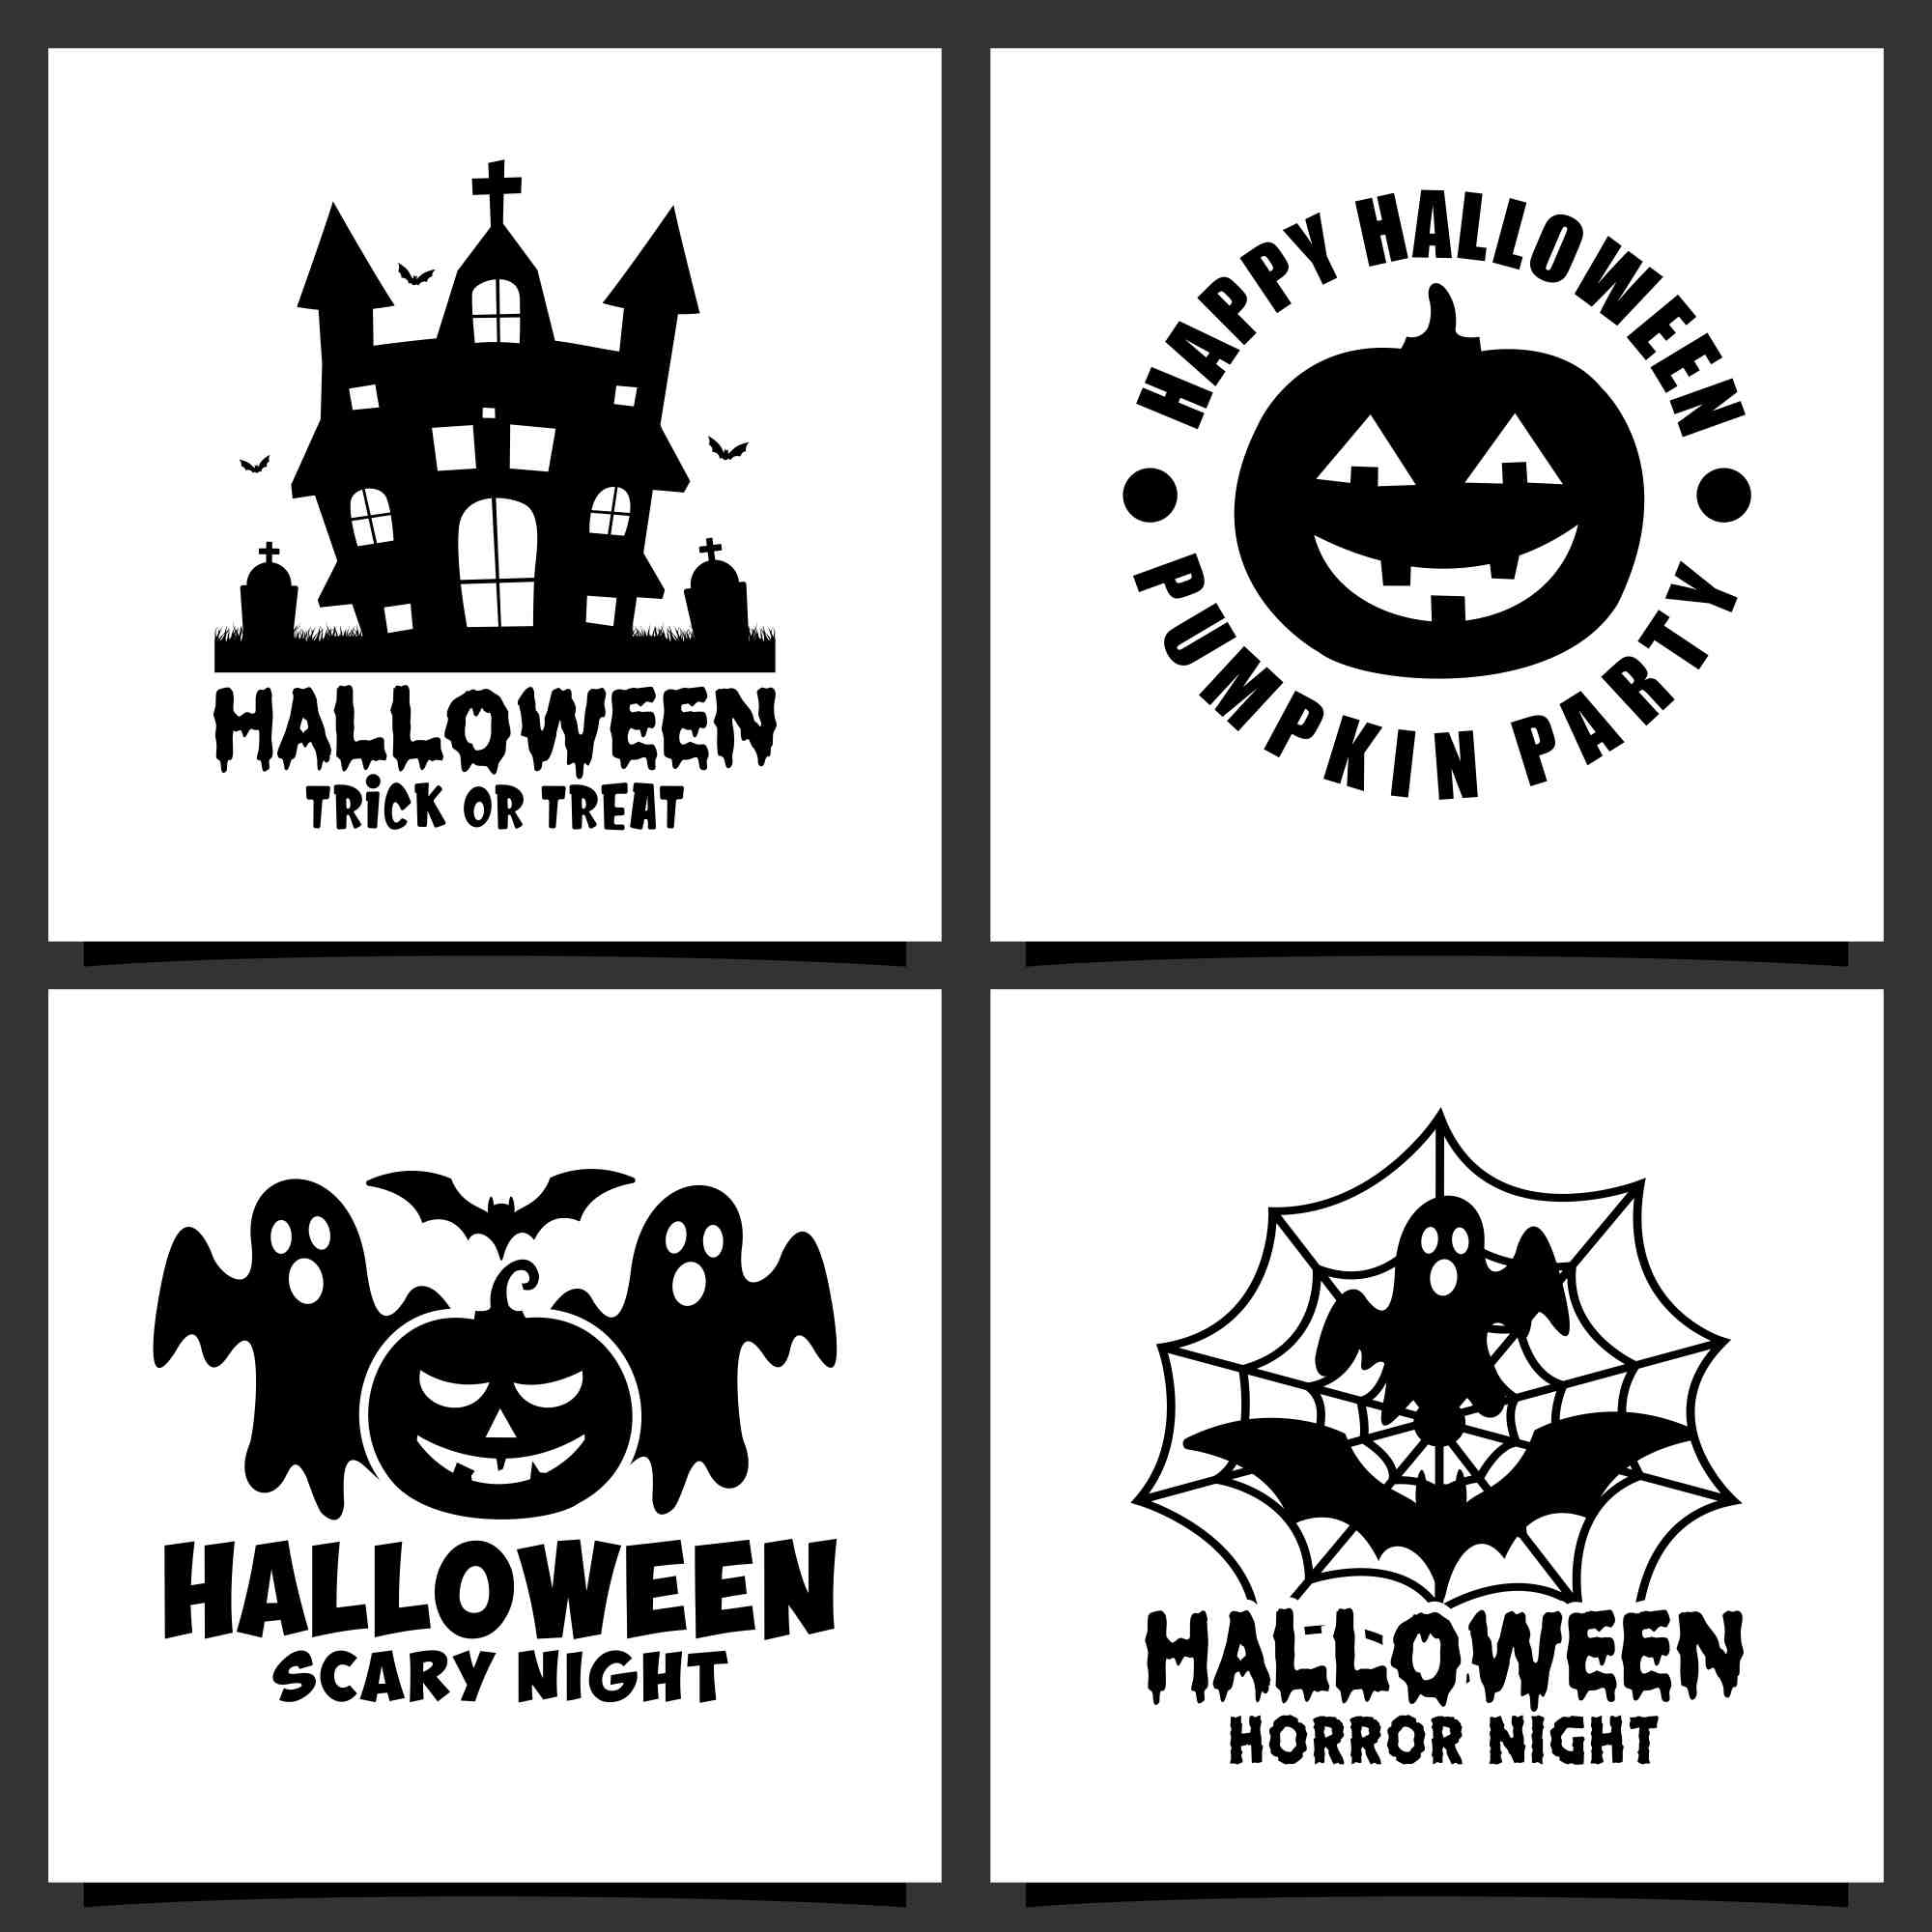 18 Happy Halloween vector silhouette collection - $8 preview image.